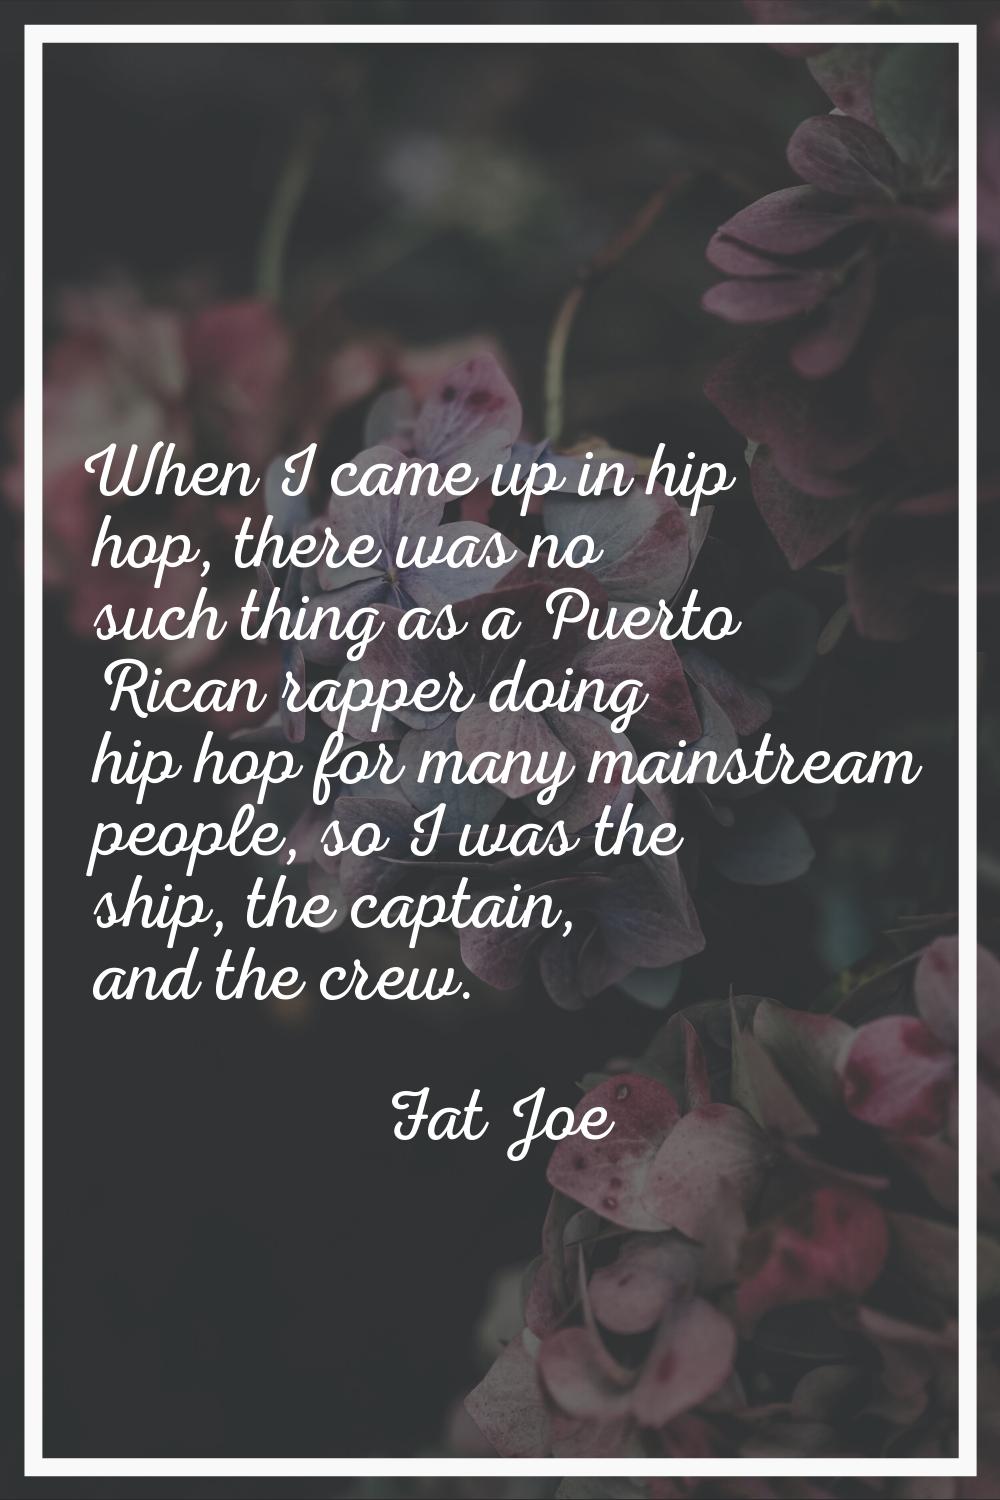 When I came up in hip hop, there was no such thing as a Puerto Rican rapper doing hip hop for many 